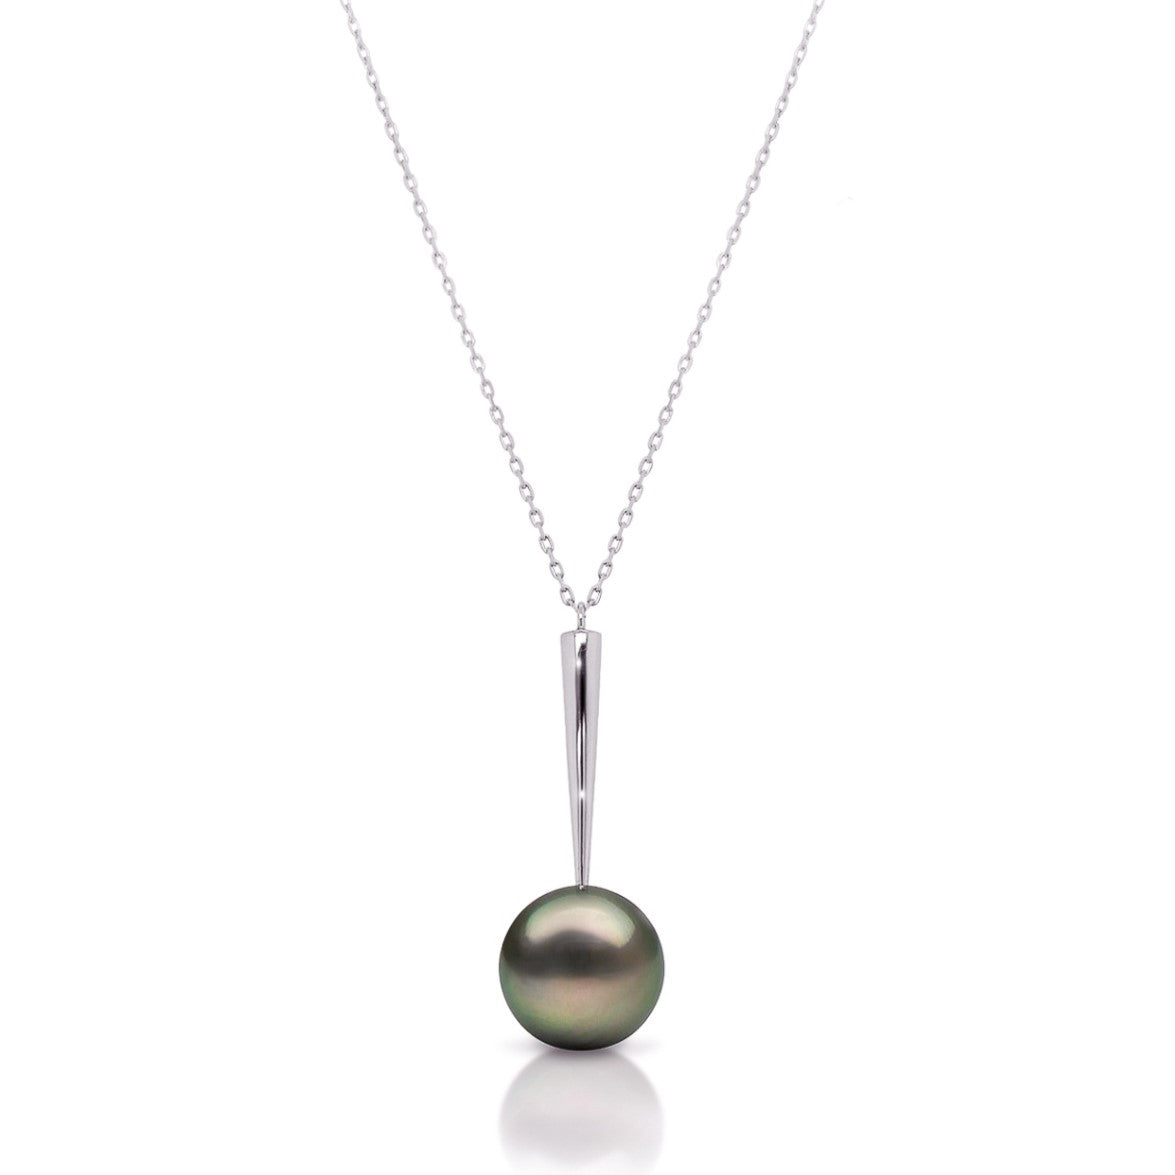 Tahitian Pearl Pendant Necklace set in 18k White Gold (by Qlassico)